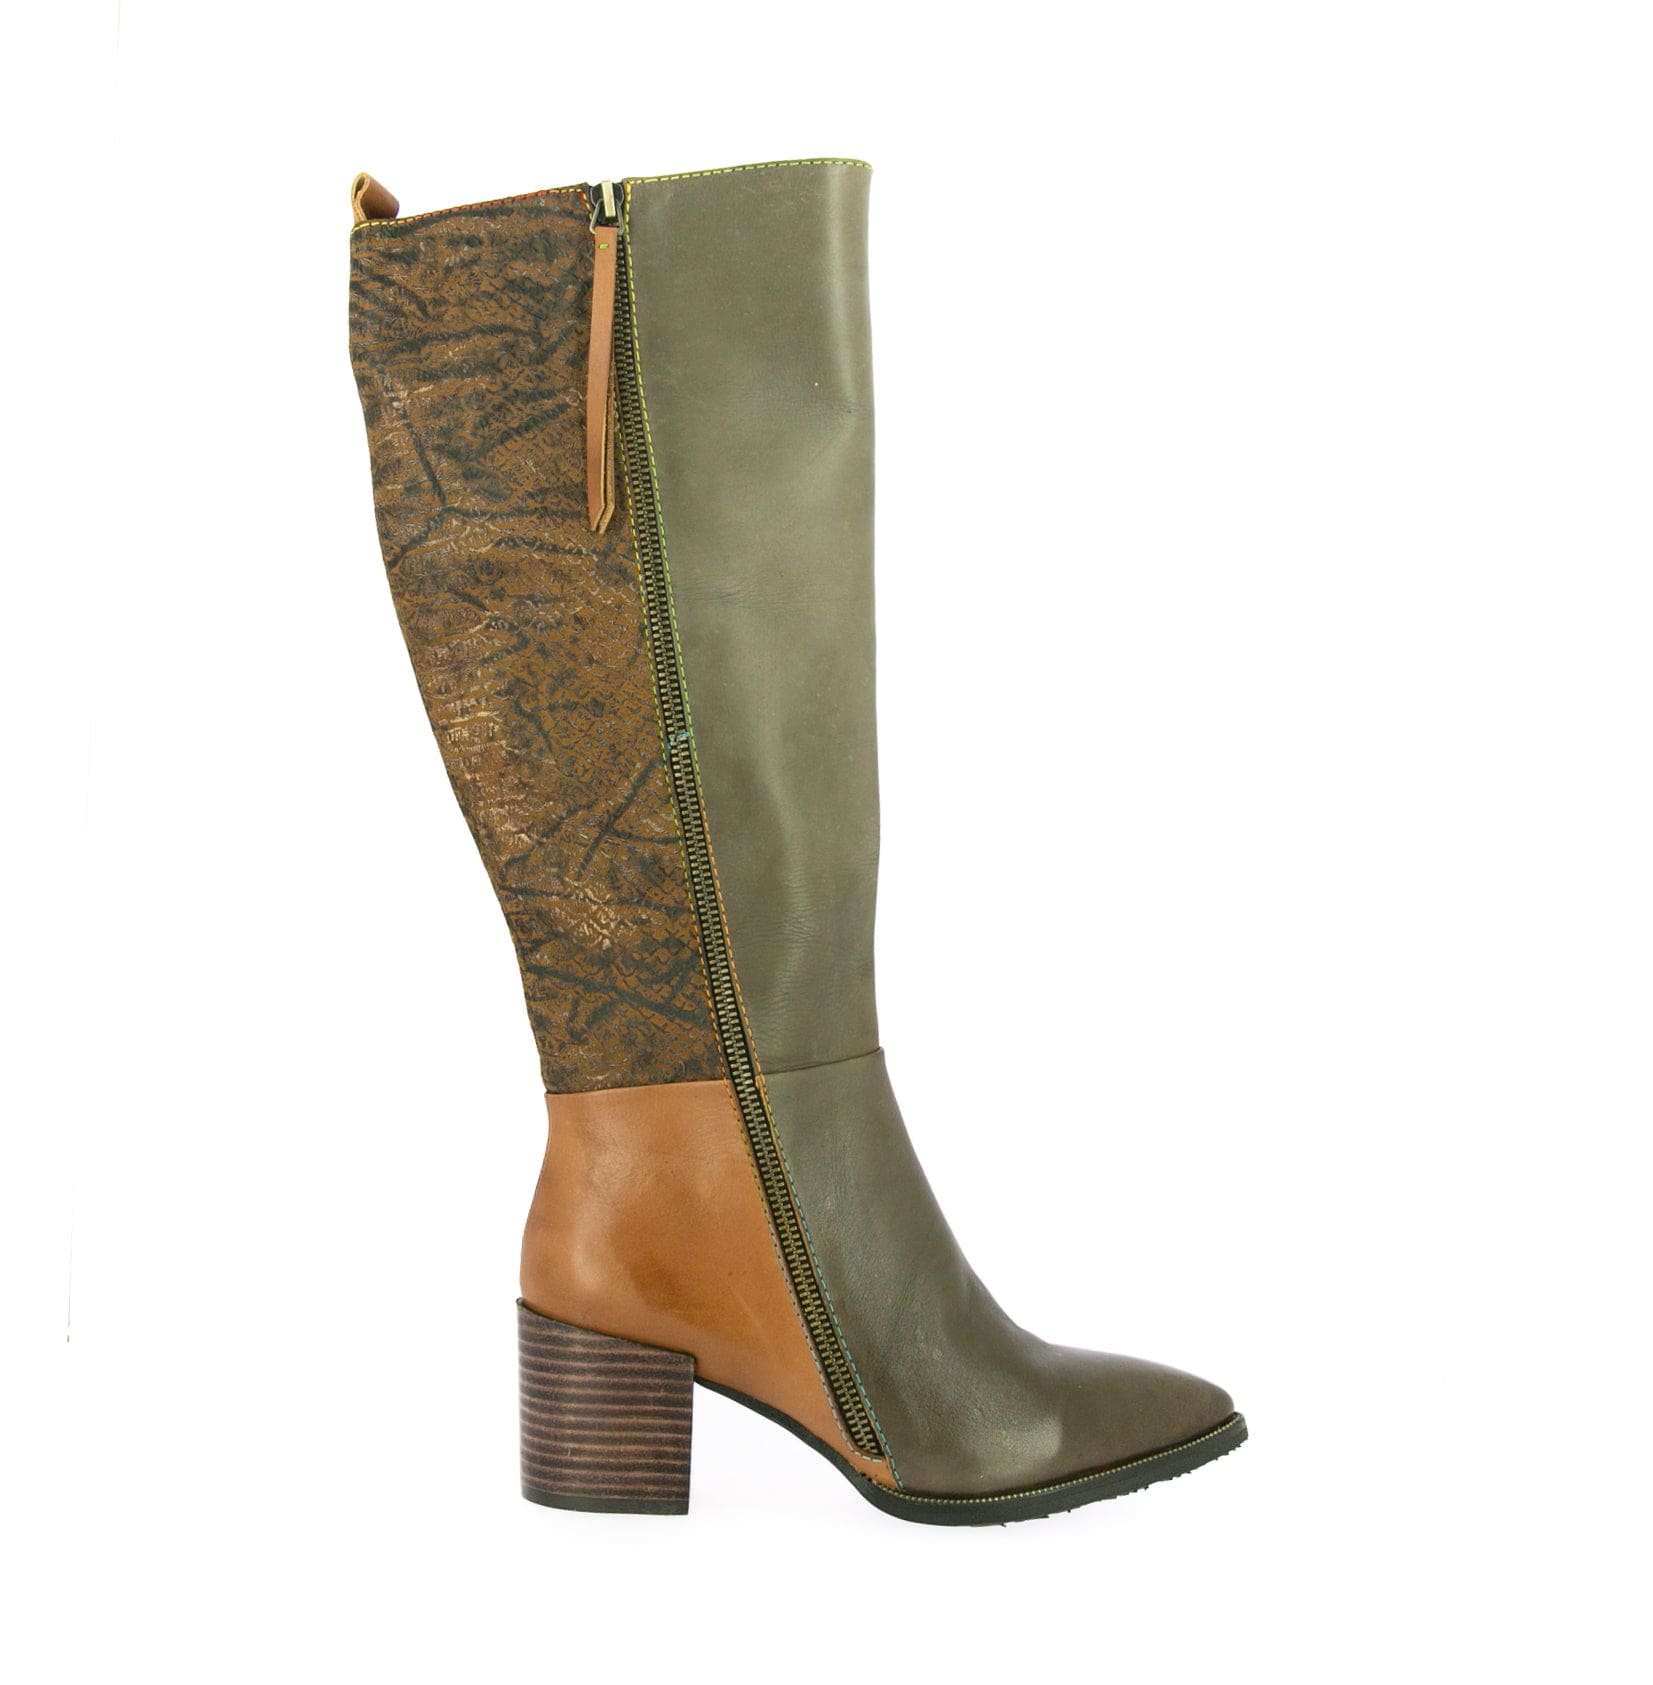 CHRISTINE 02 shoes - 35 / Taupe - Boot